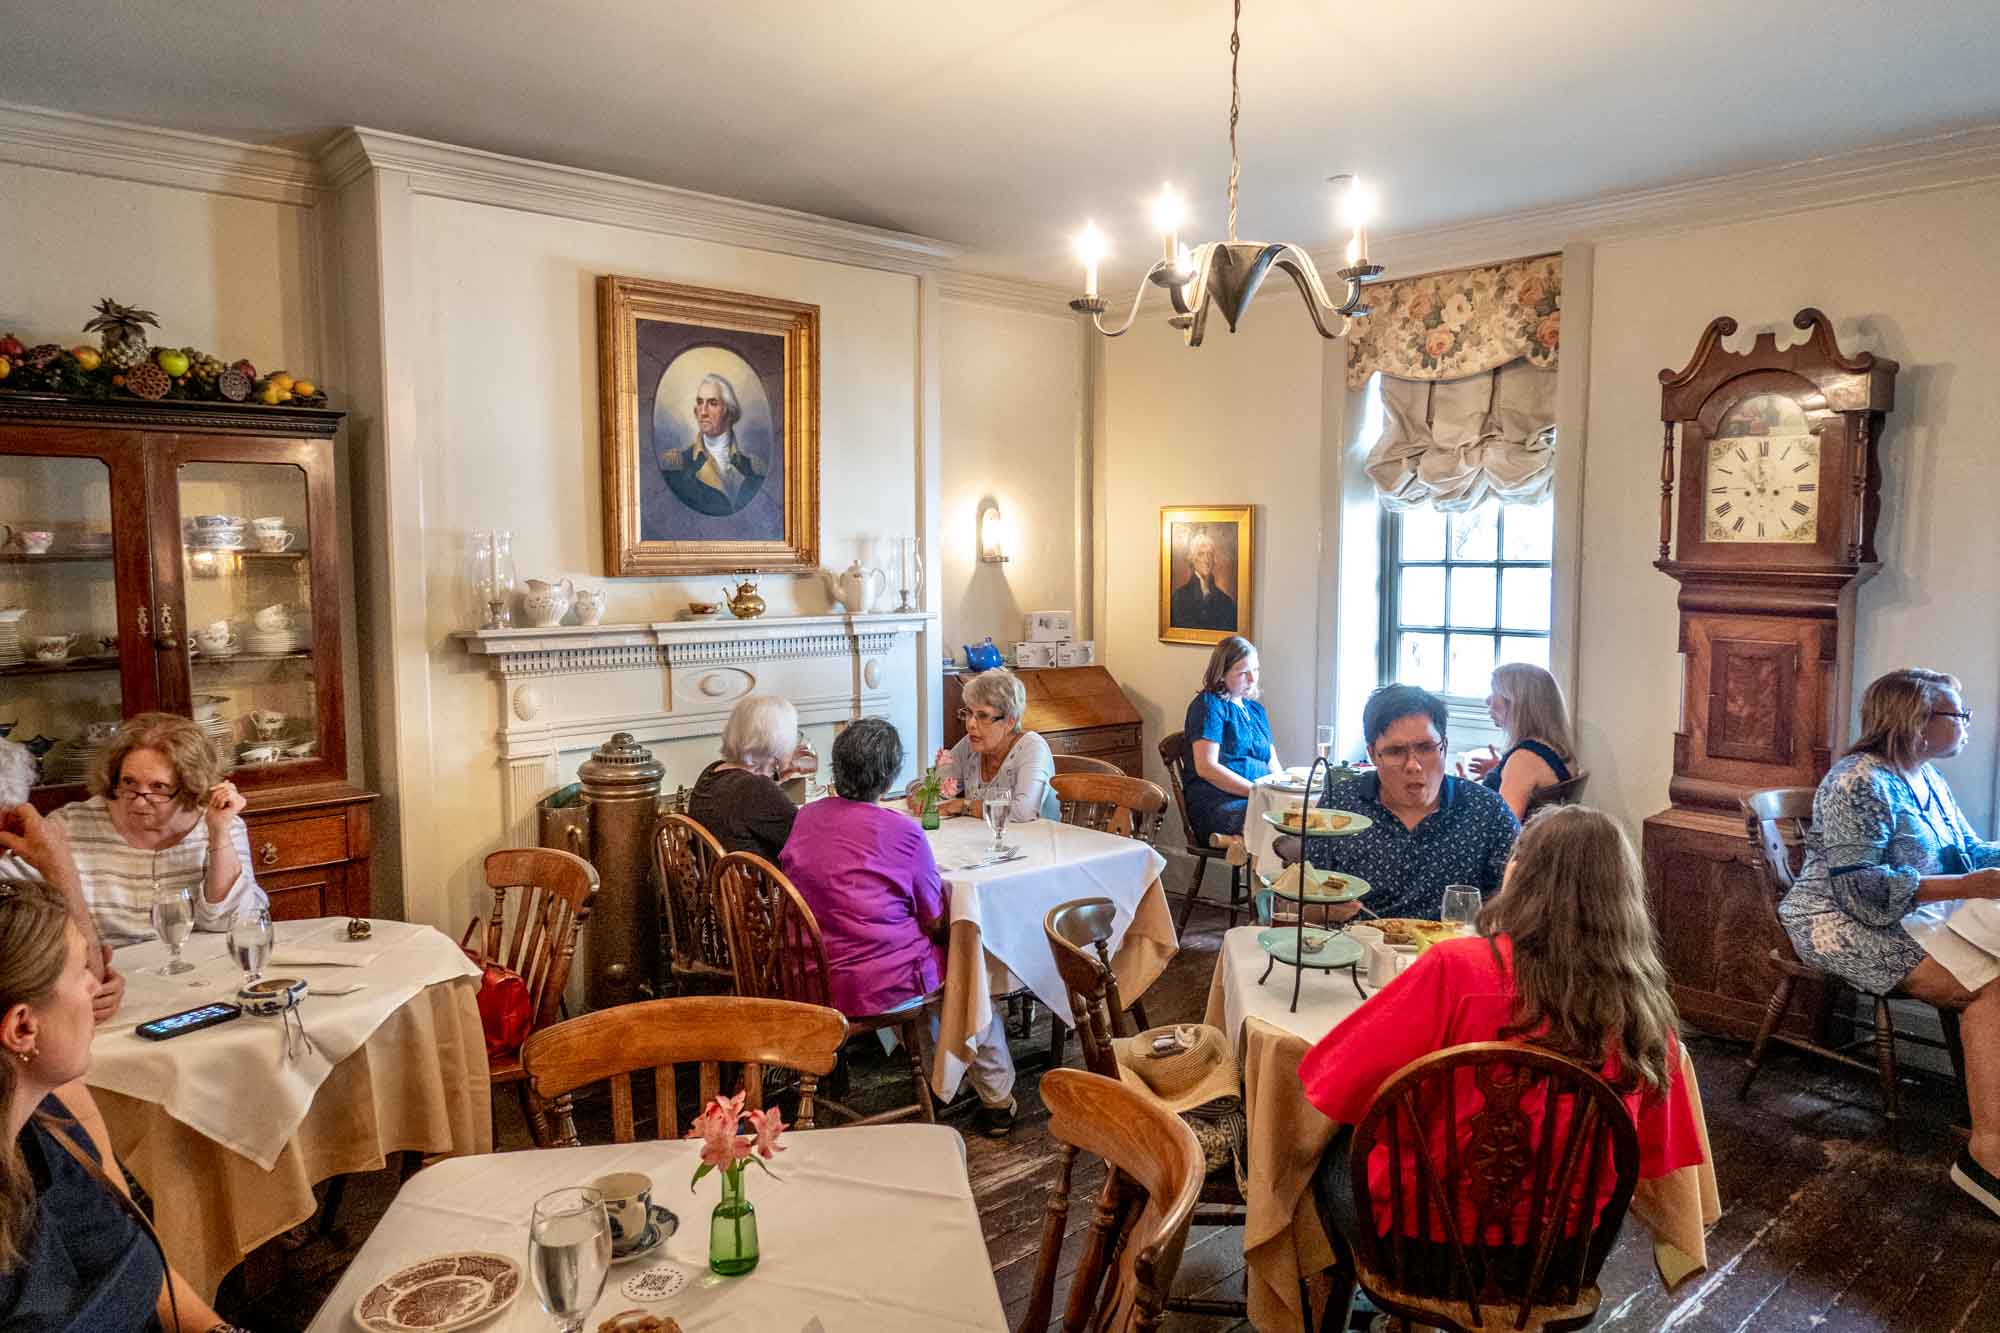 People eating at tables in a Colonial-style dining room with a portrait of George Washington on the wall